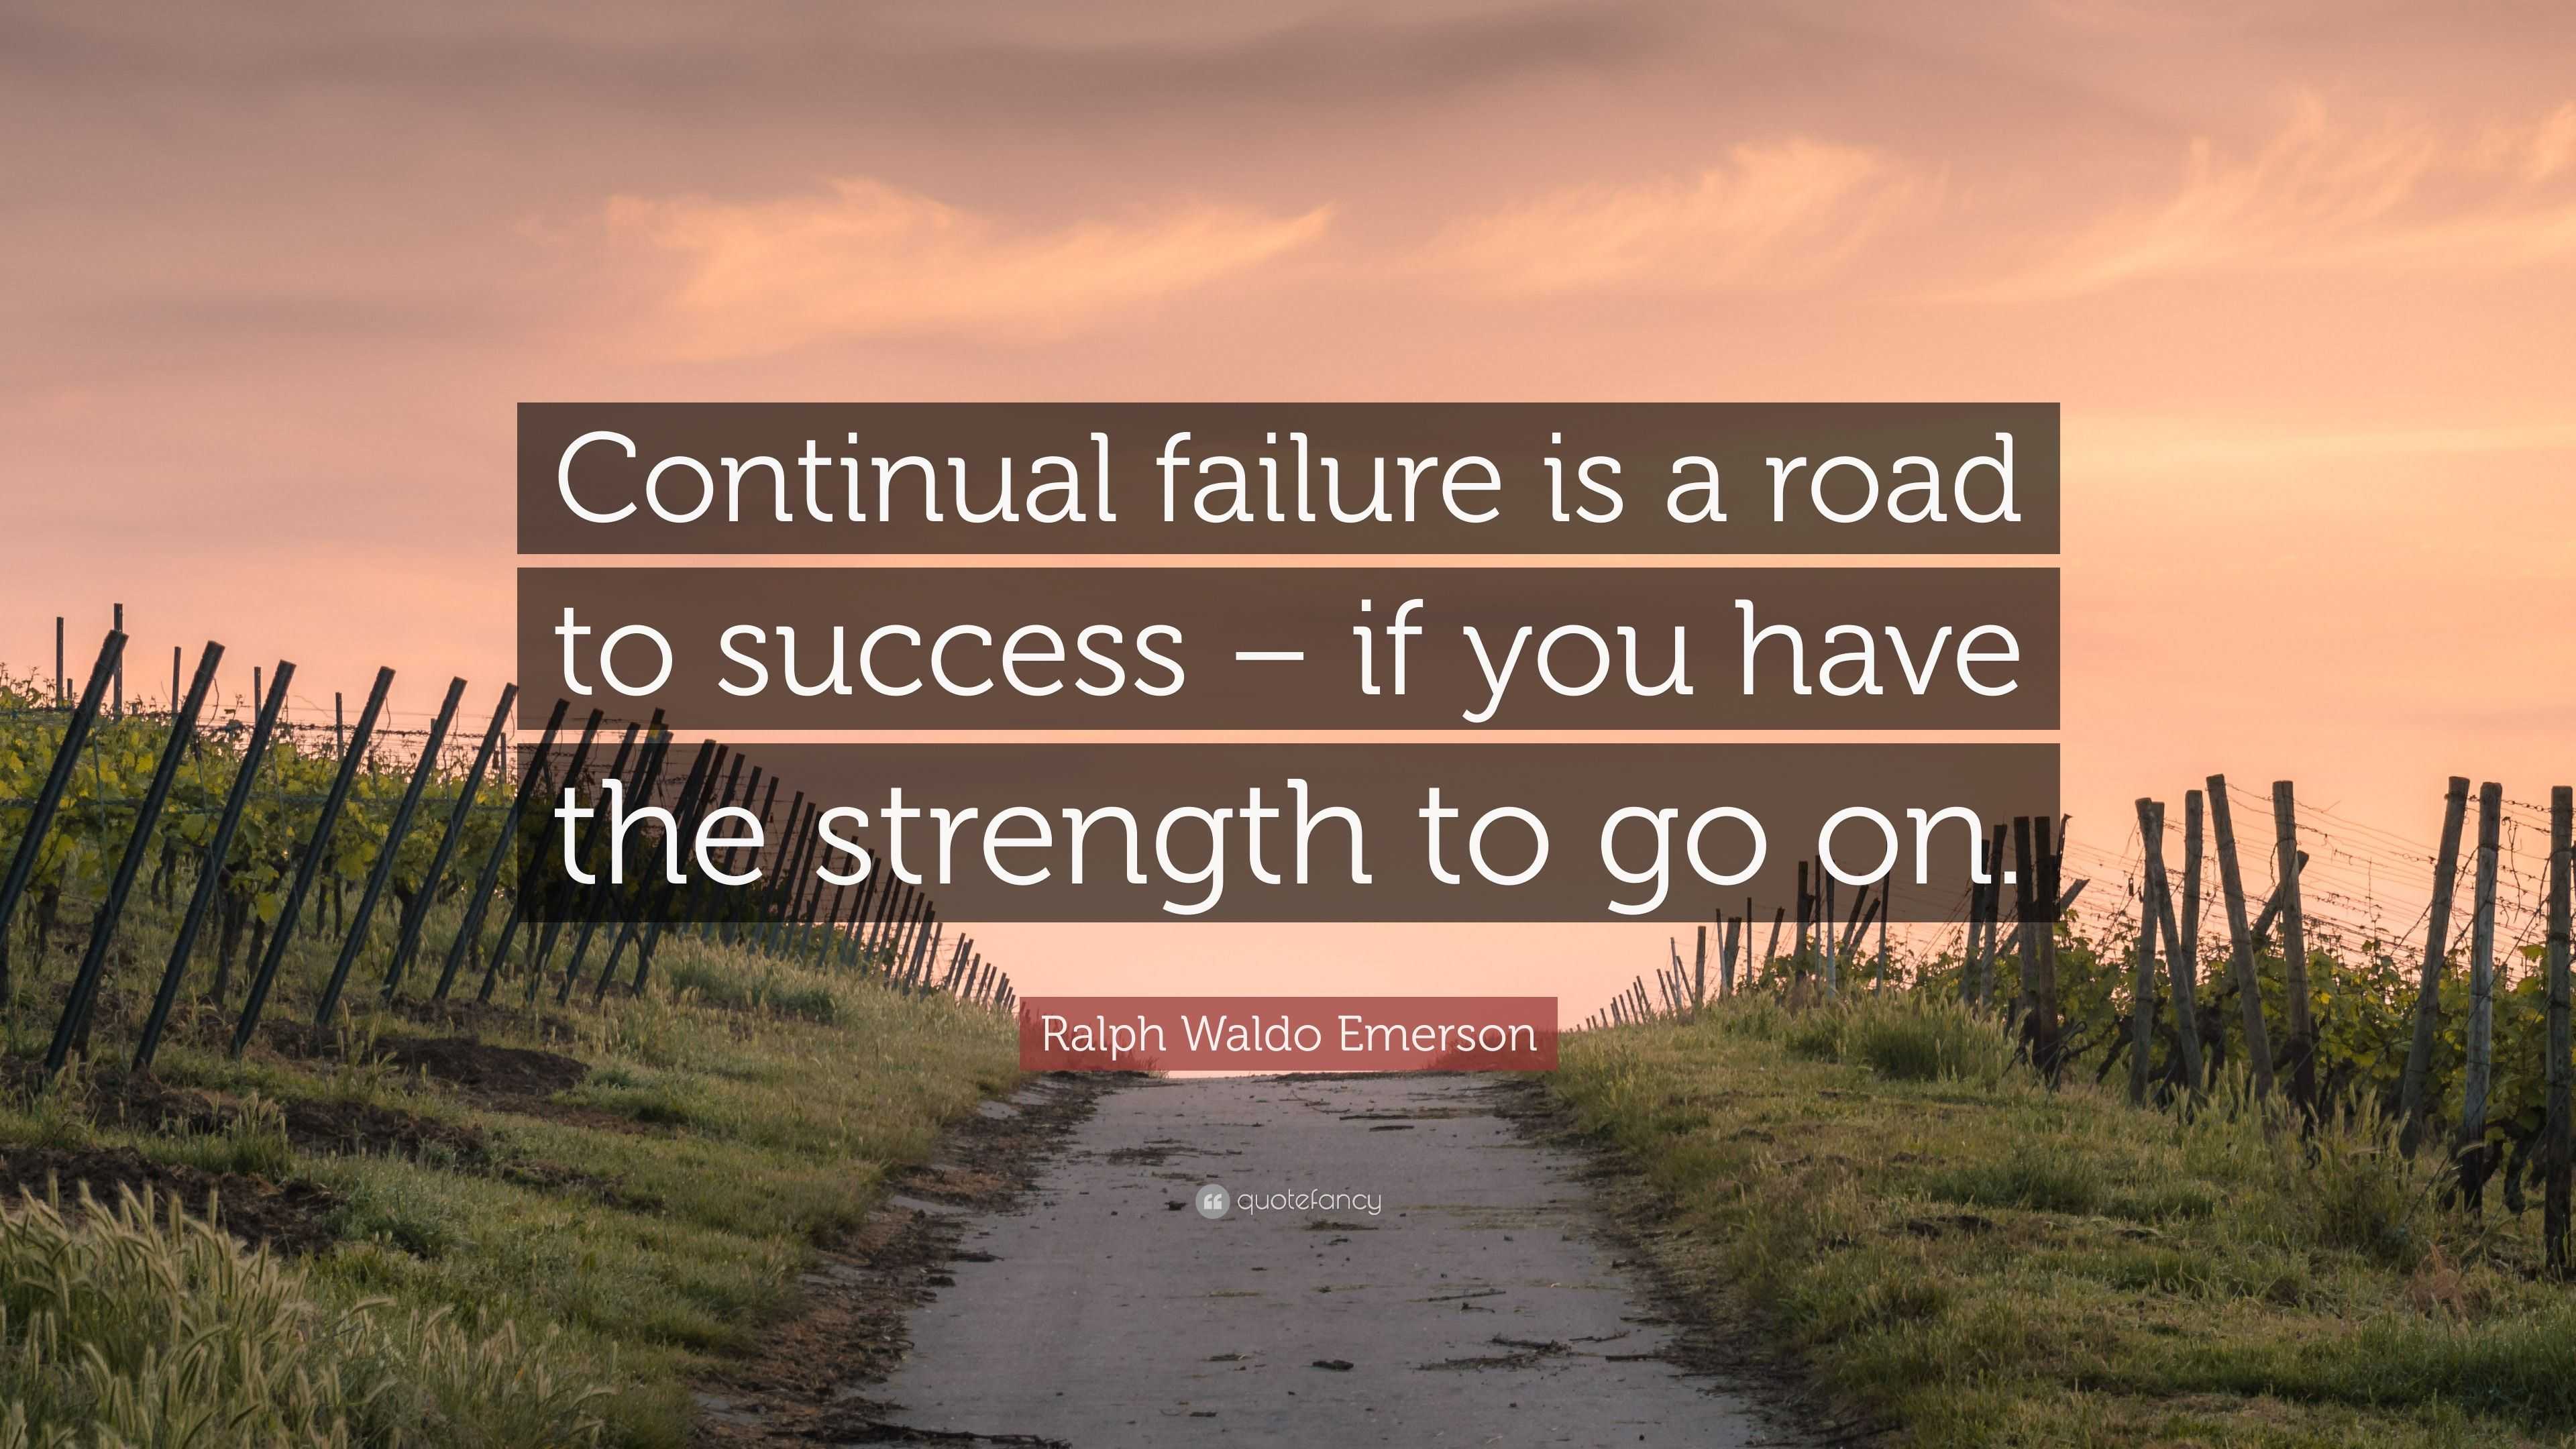 Ralph Waldo Emerson Quote: “Continual failure is a road to success – if ...